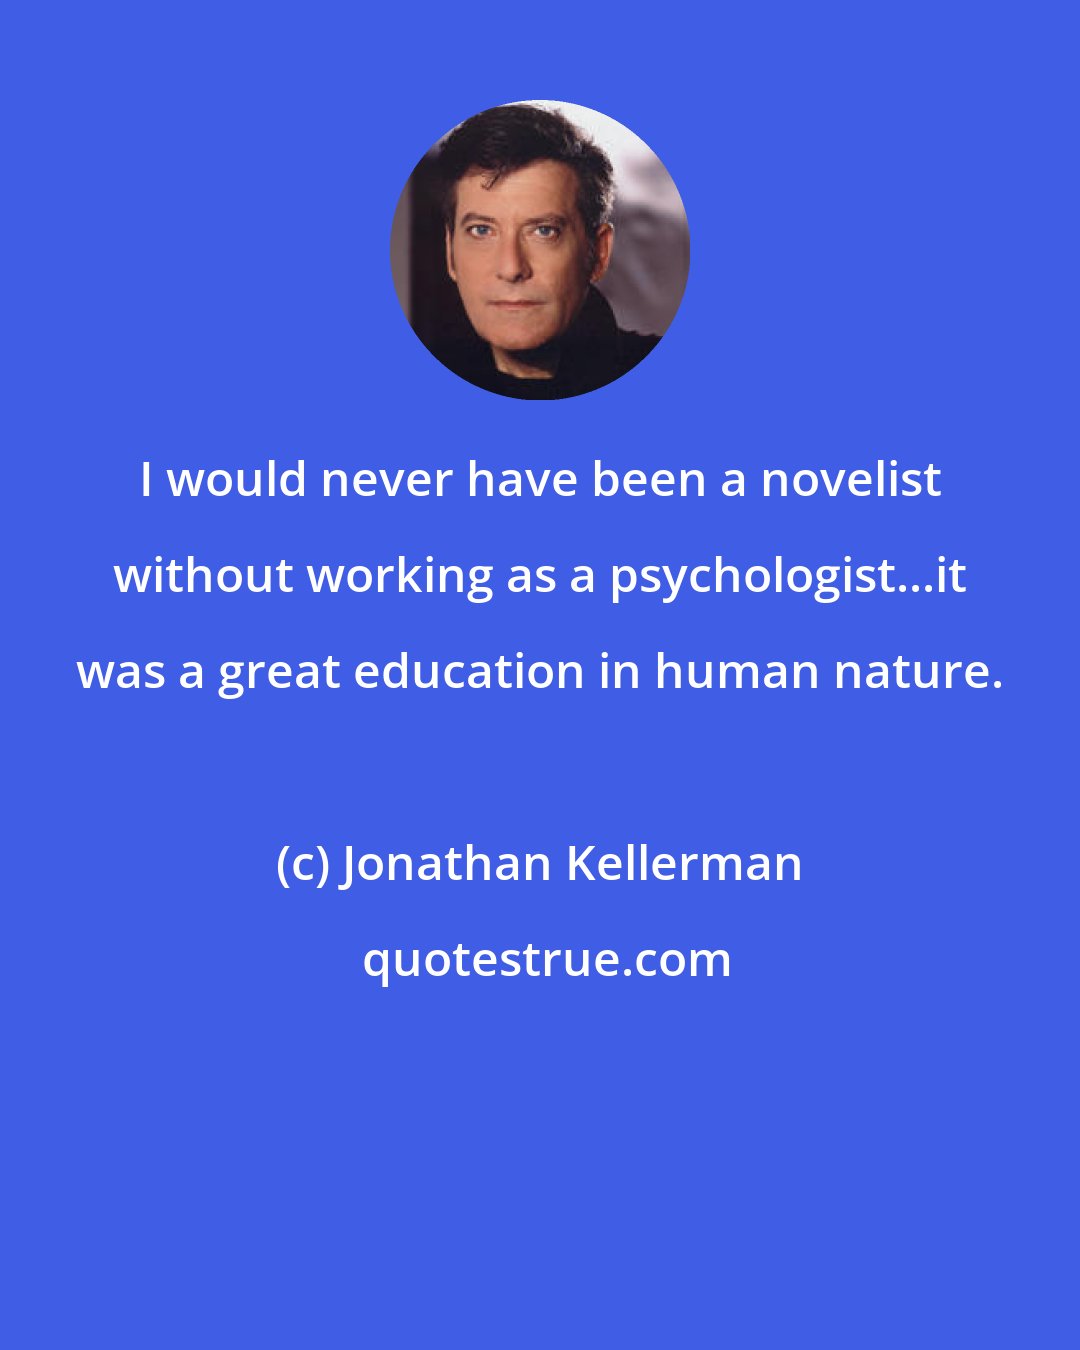 Jonathan Kellerman: I would never have been a novelist without working as a psychologist...it was a great education in human nature.